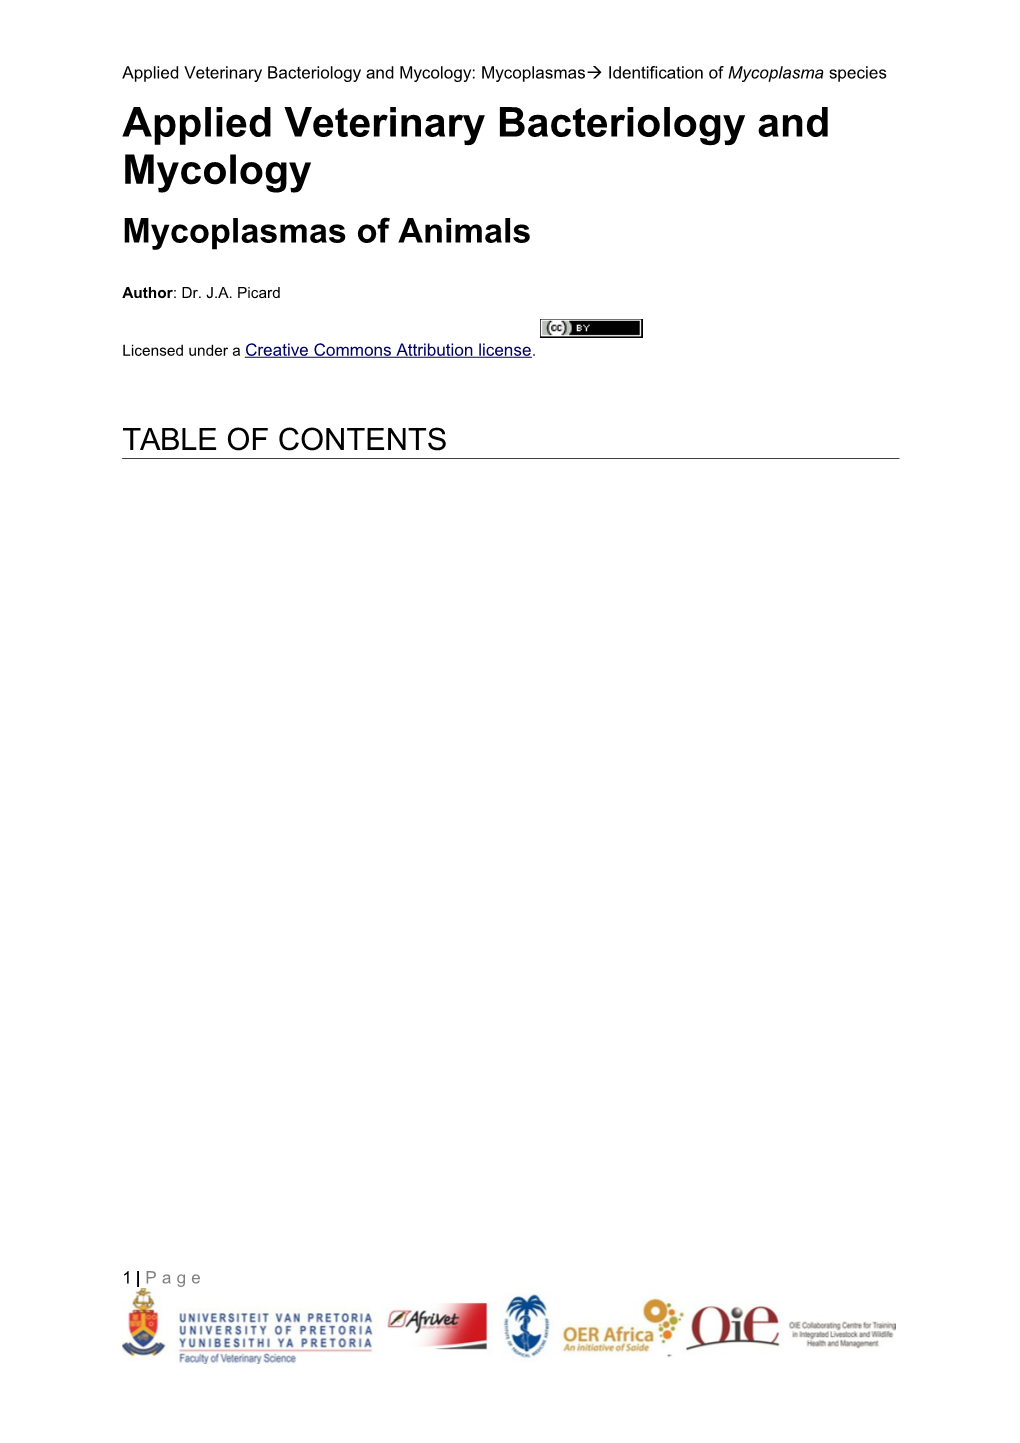 Applied Veterinary Bacteriology and Mycology